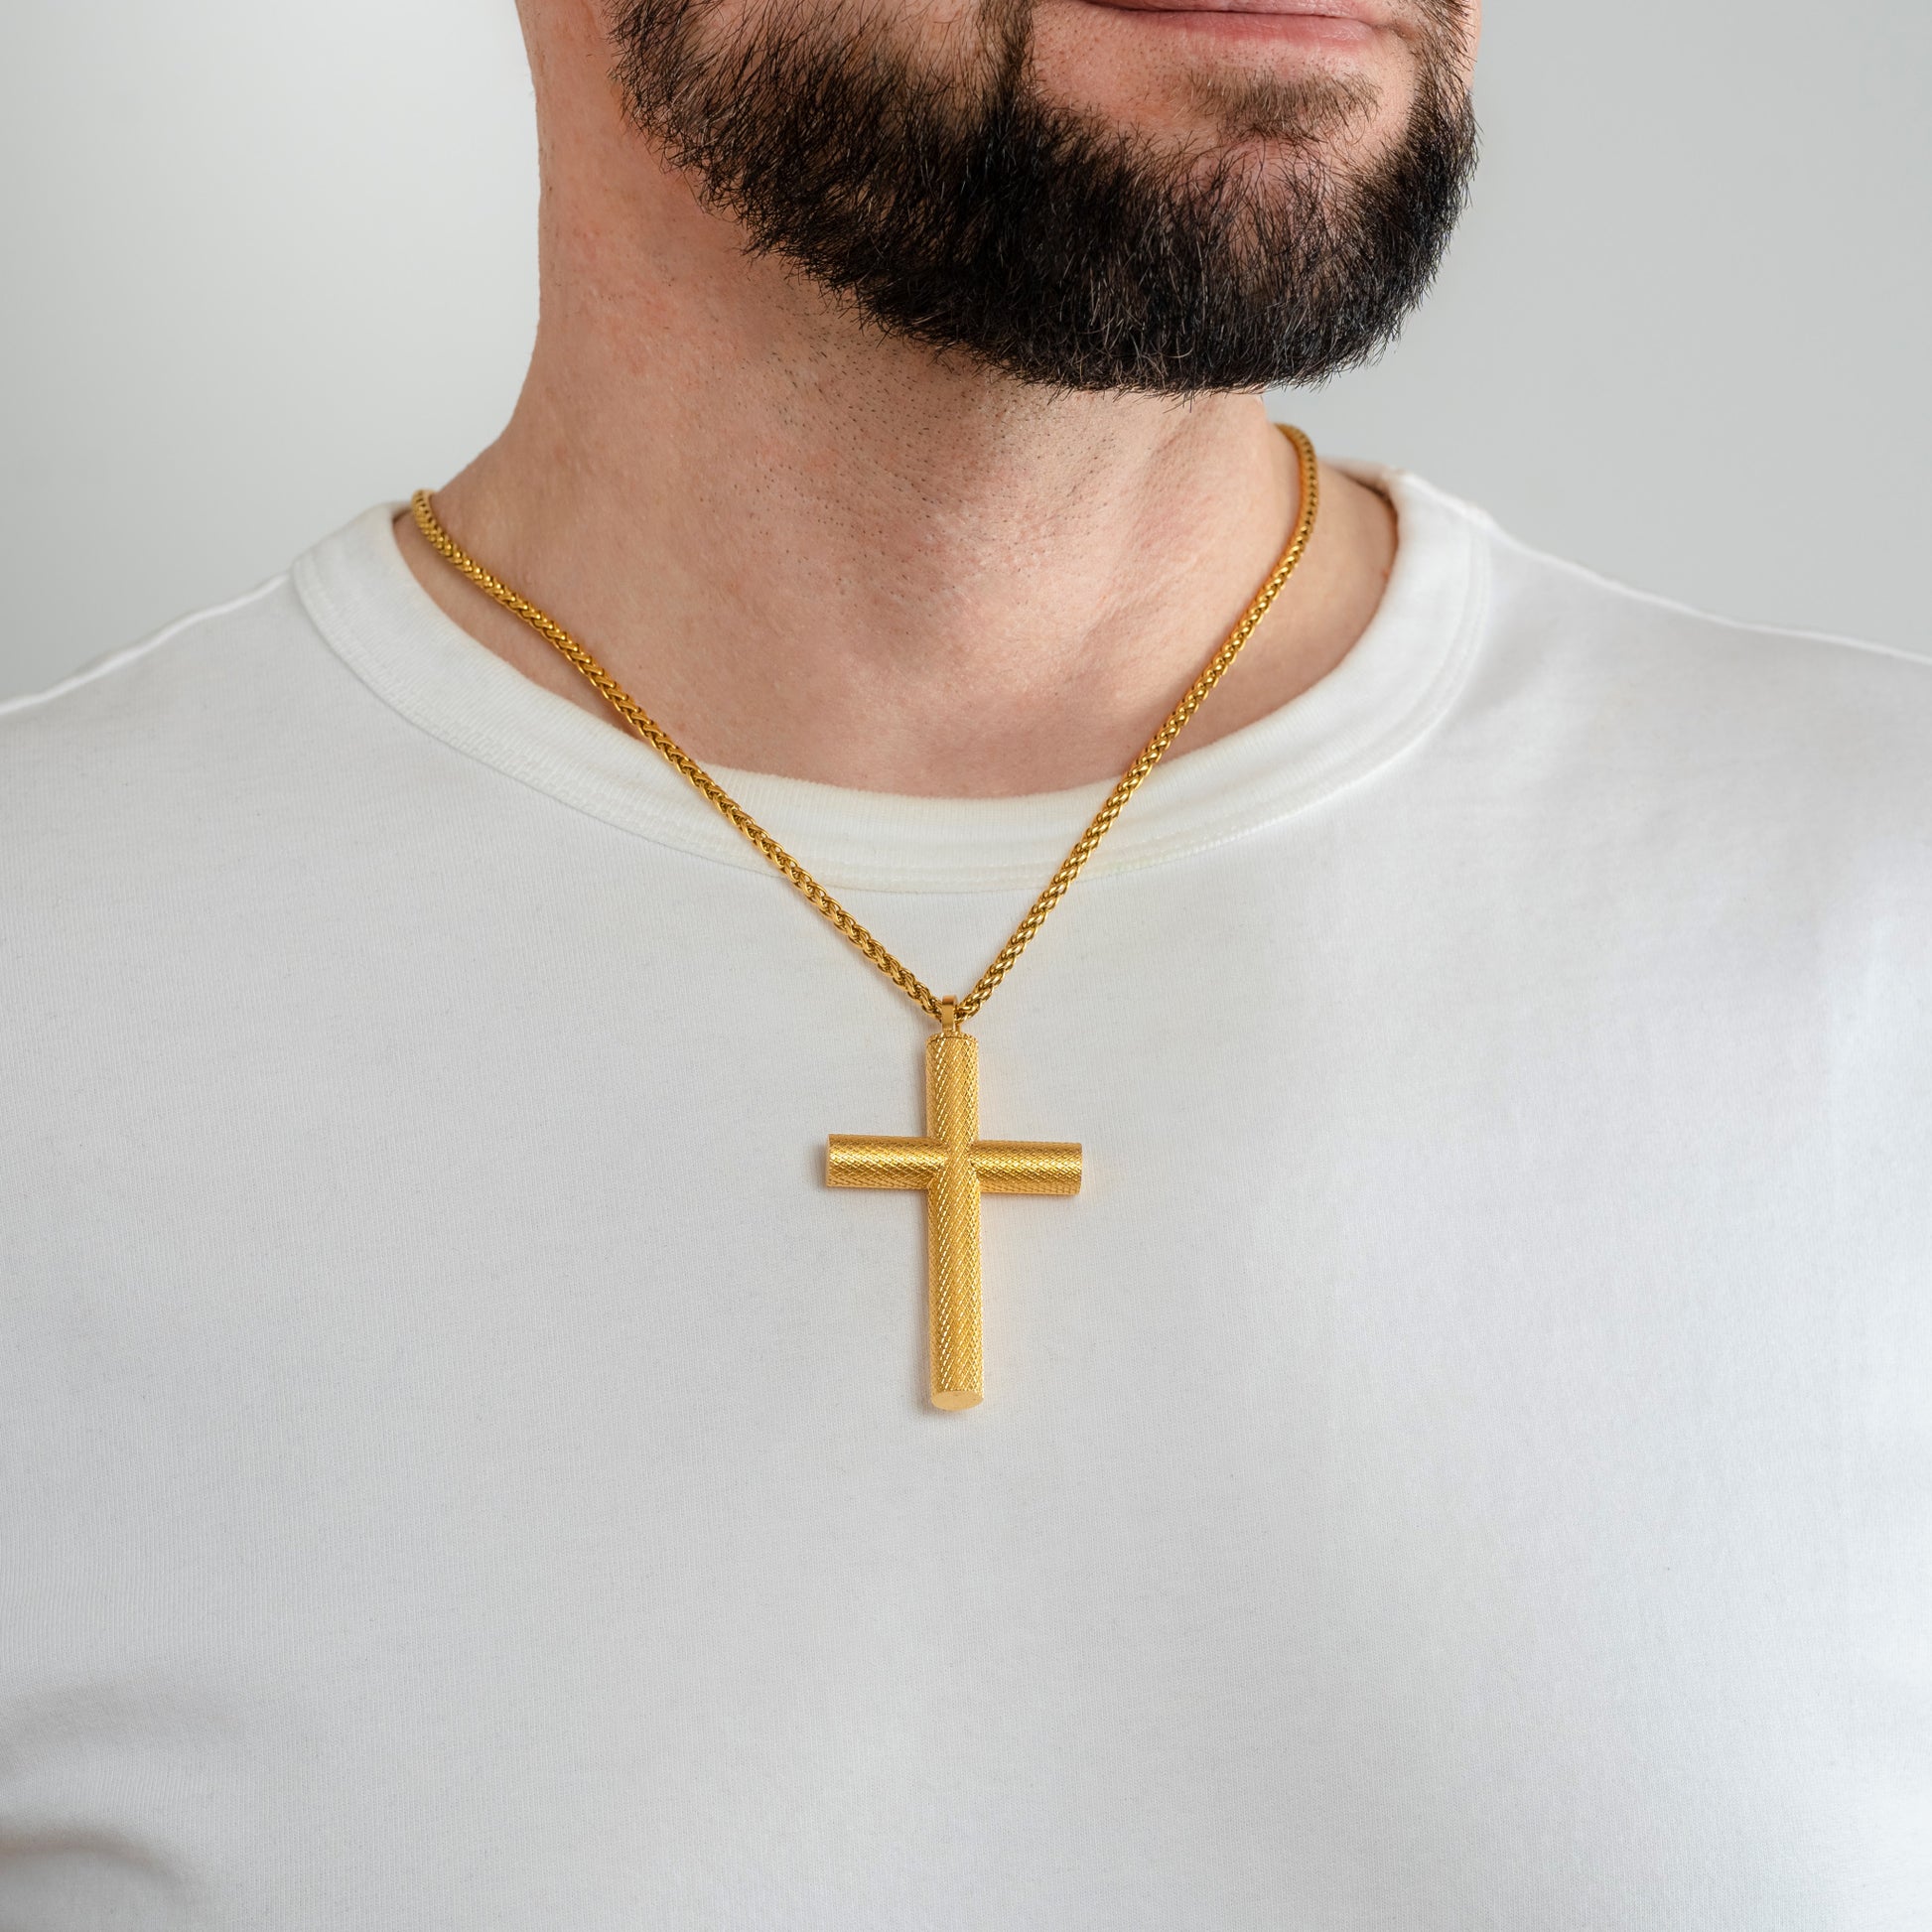 A male model in a white t-shirt wearing a Bison Cross Gold Self-fill Pendant with a 3mm Gold Spiga chain 22 inches.